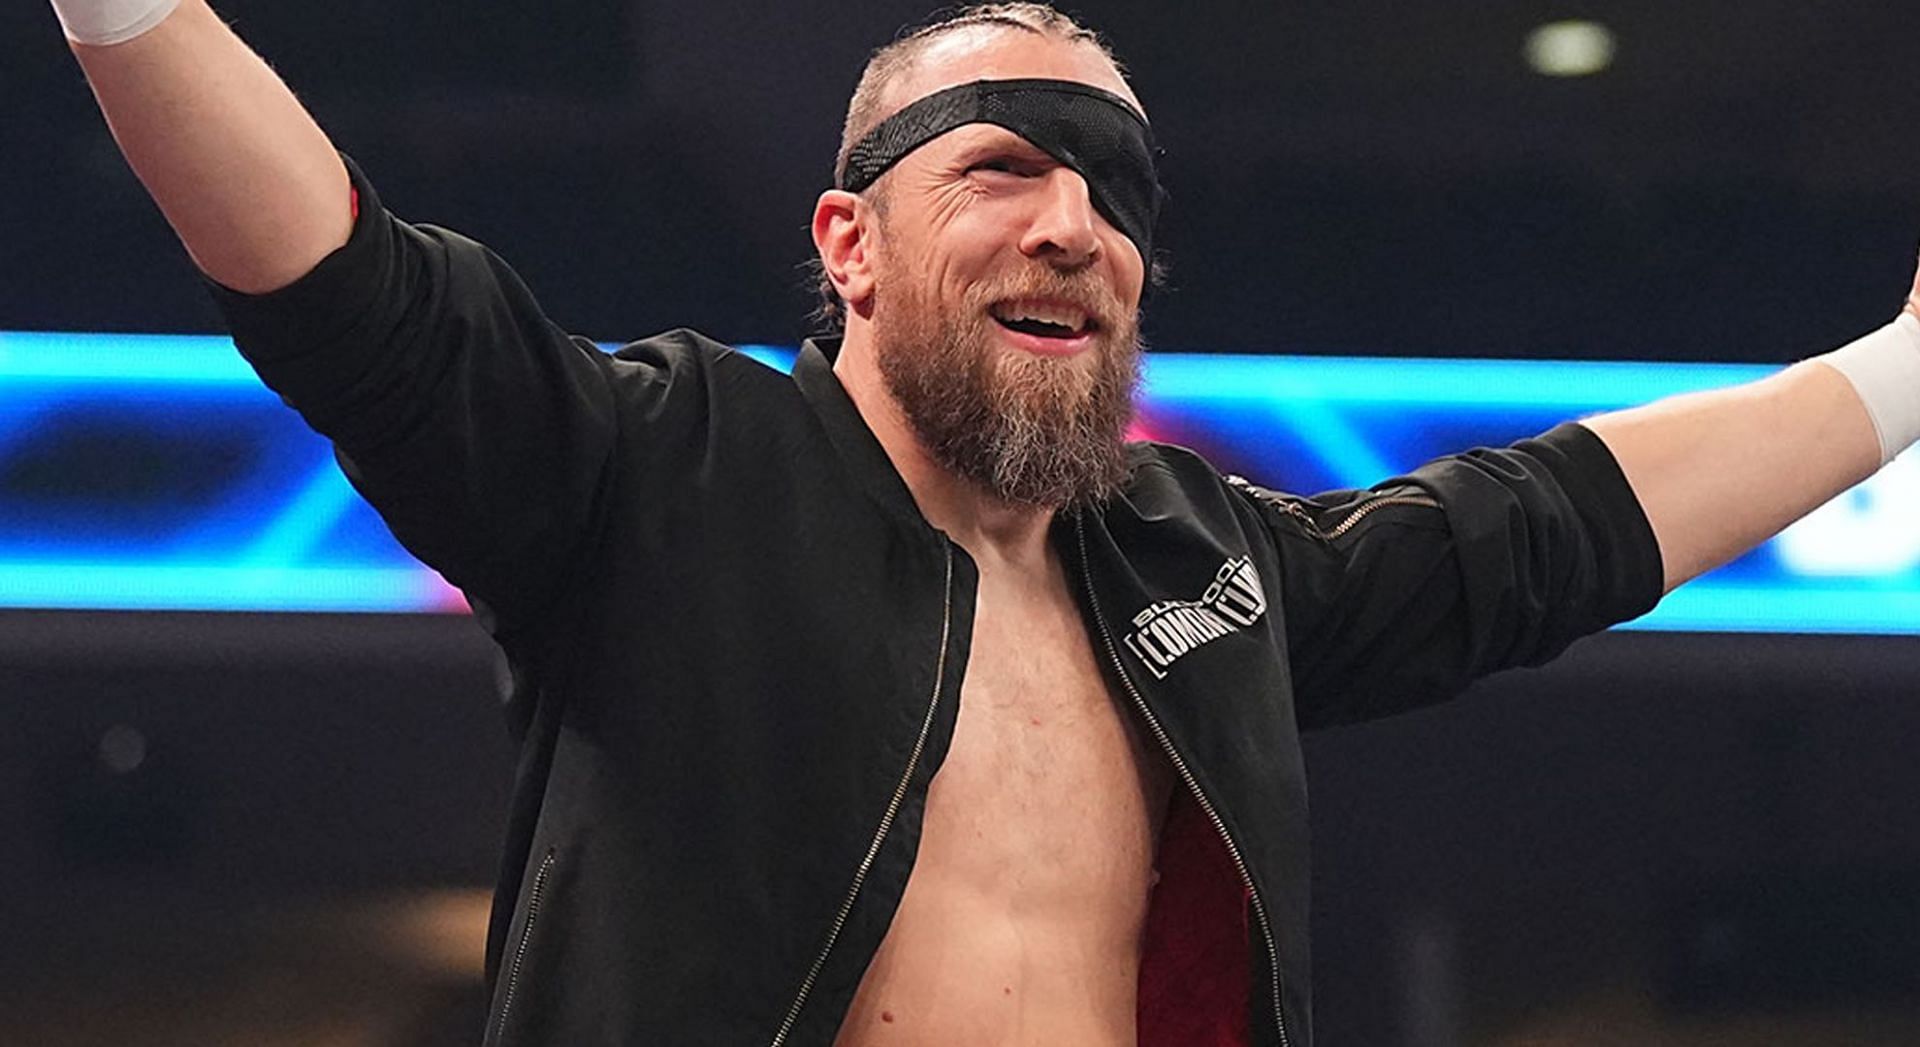 Bryan Danielson reveals plans at the end of his full-time wrestling career